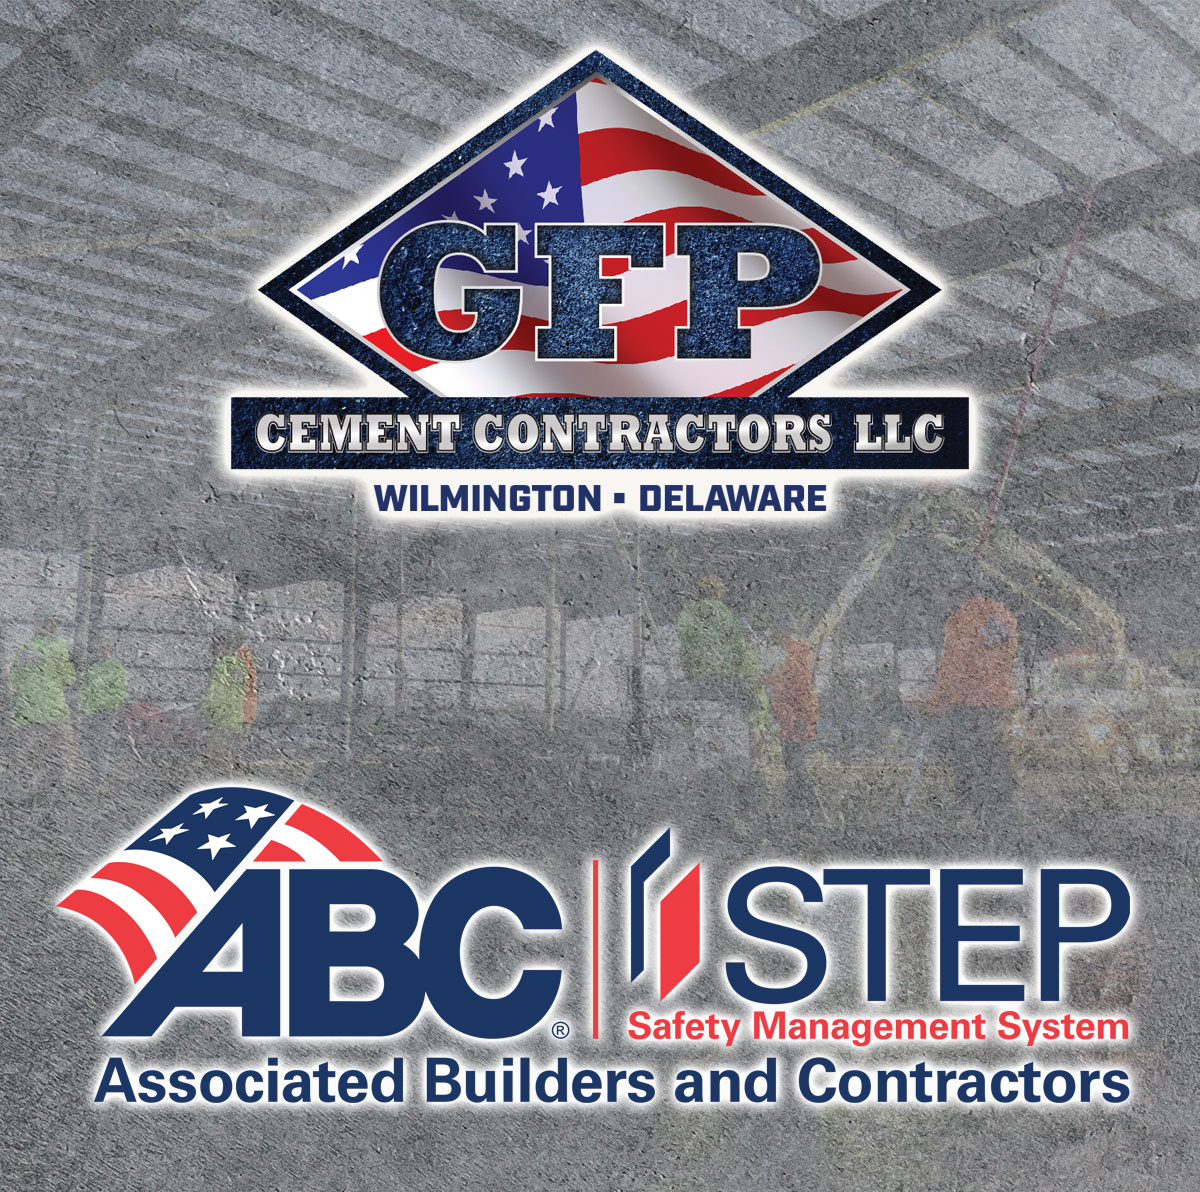 GFP Cement Contractors, LLC Achieves World-Class Safety Standards Through ABC STEP Program